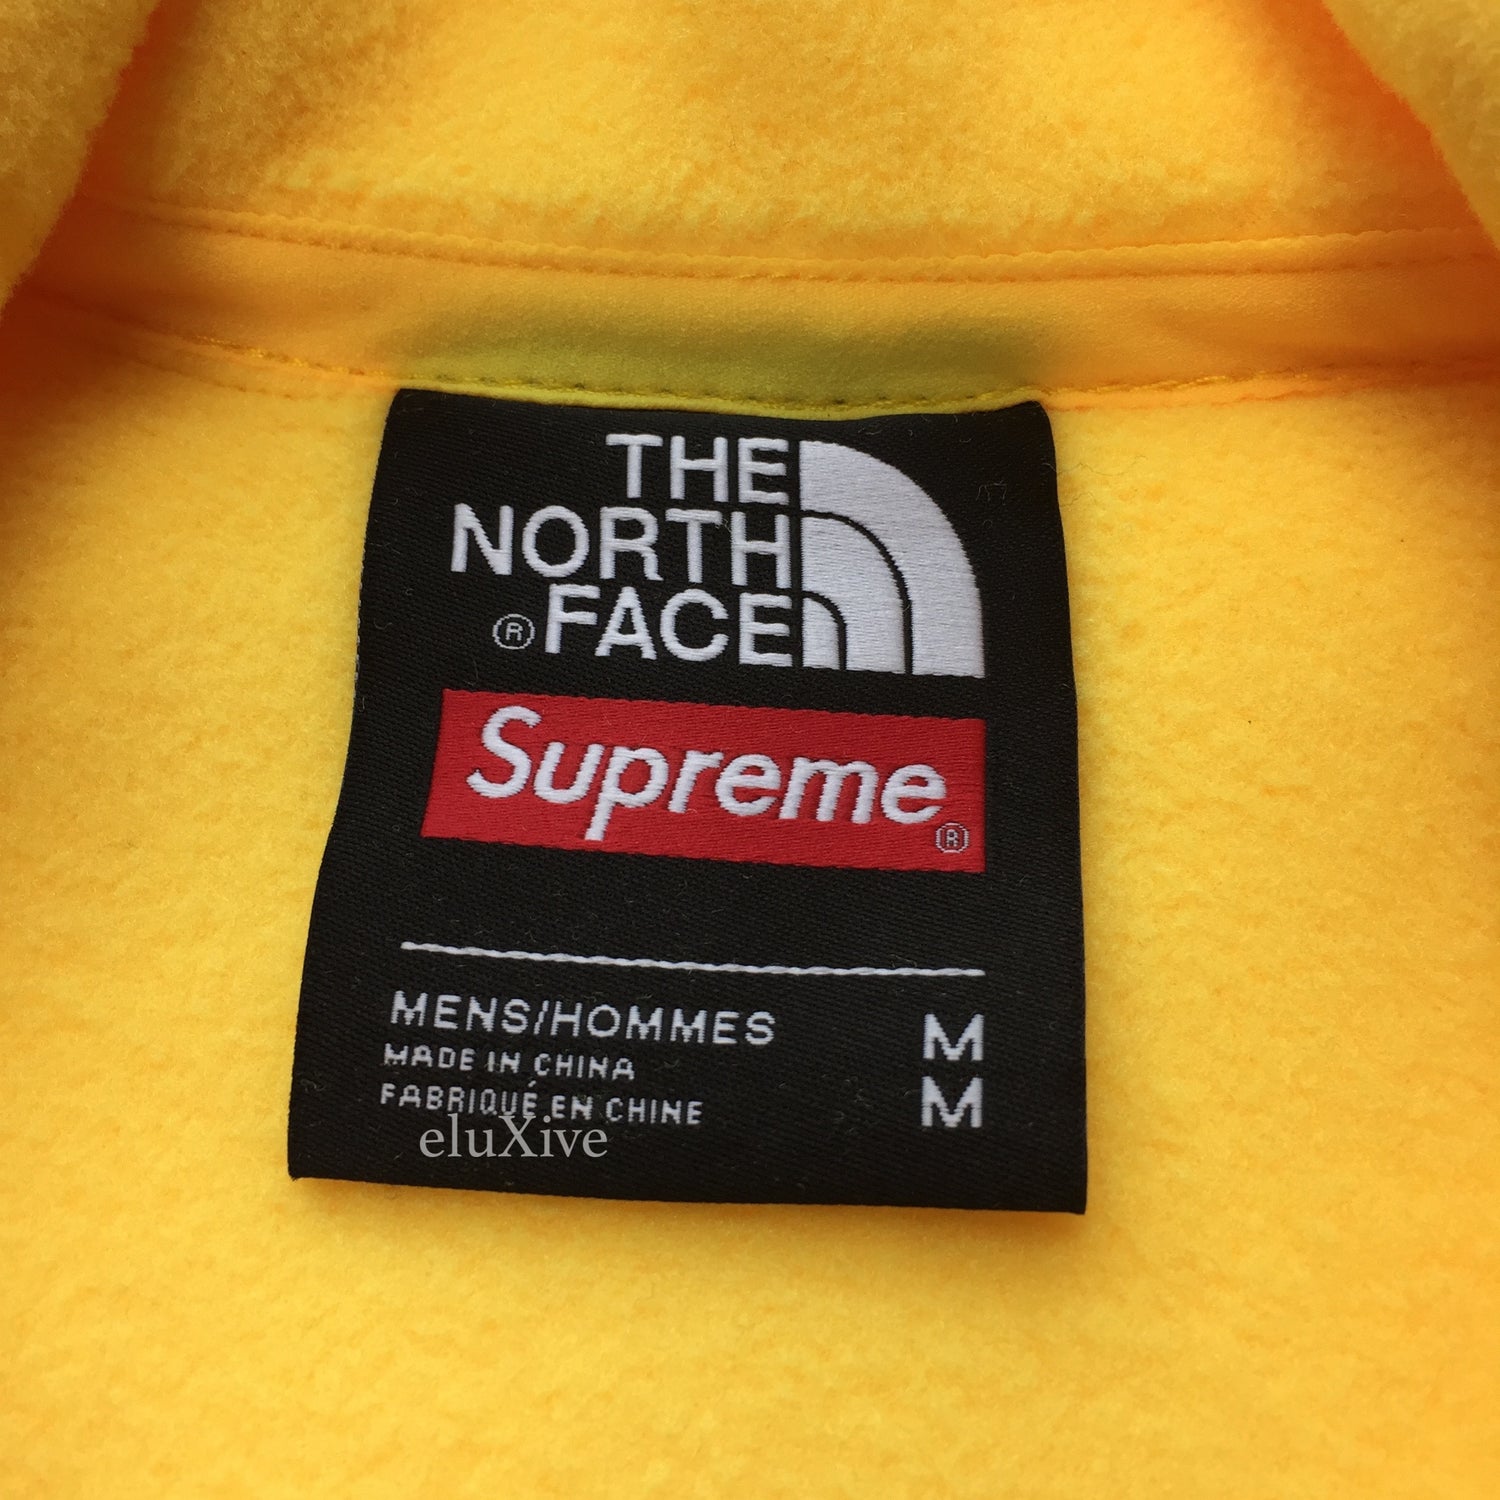 Supreme x The North Face   Yellow Trans Antarctica Expedition